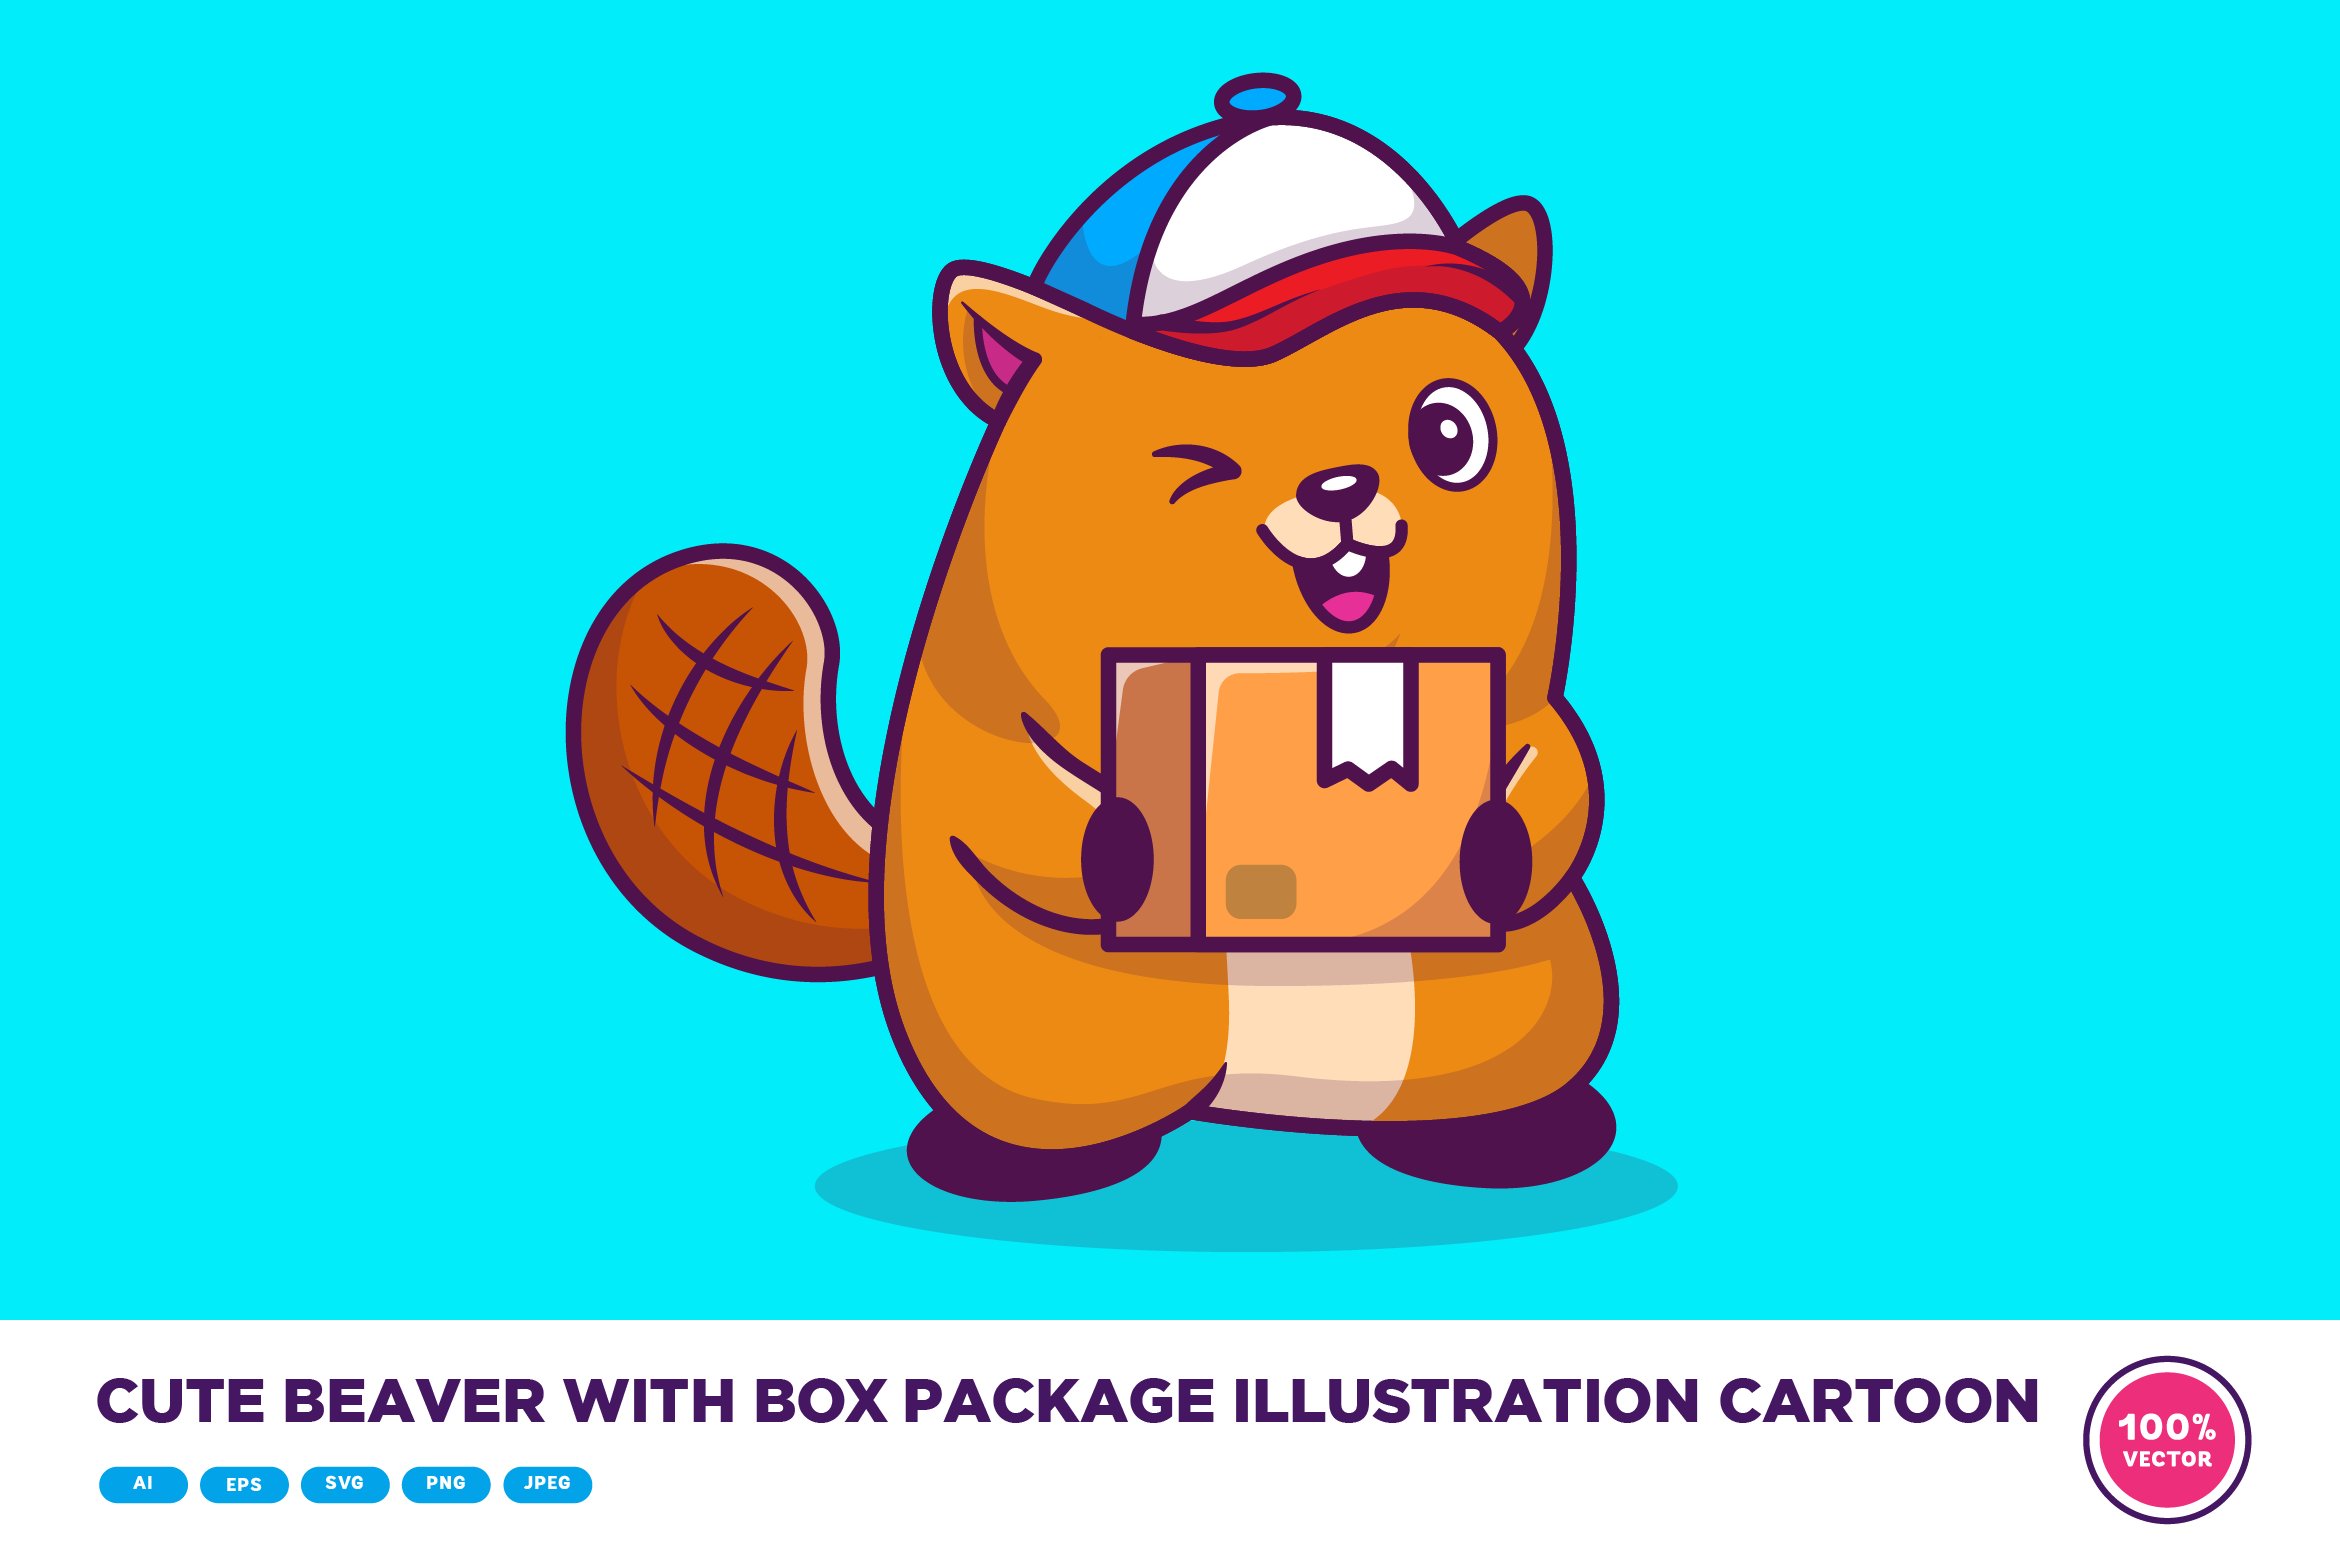 Cute Beaver With Box Package Cartoon cover image.